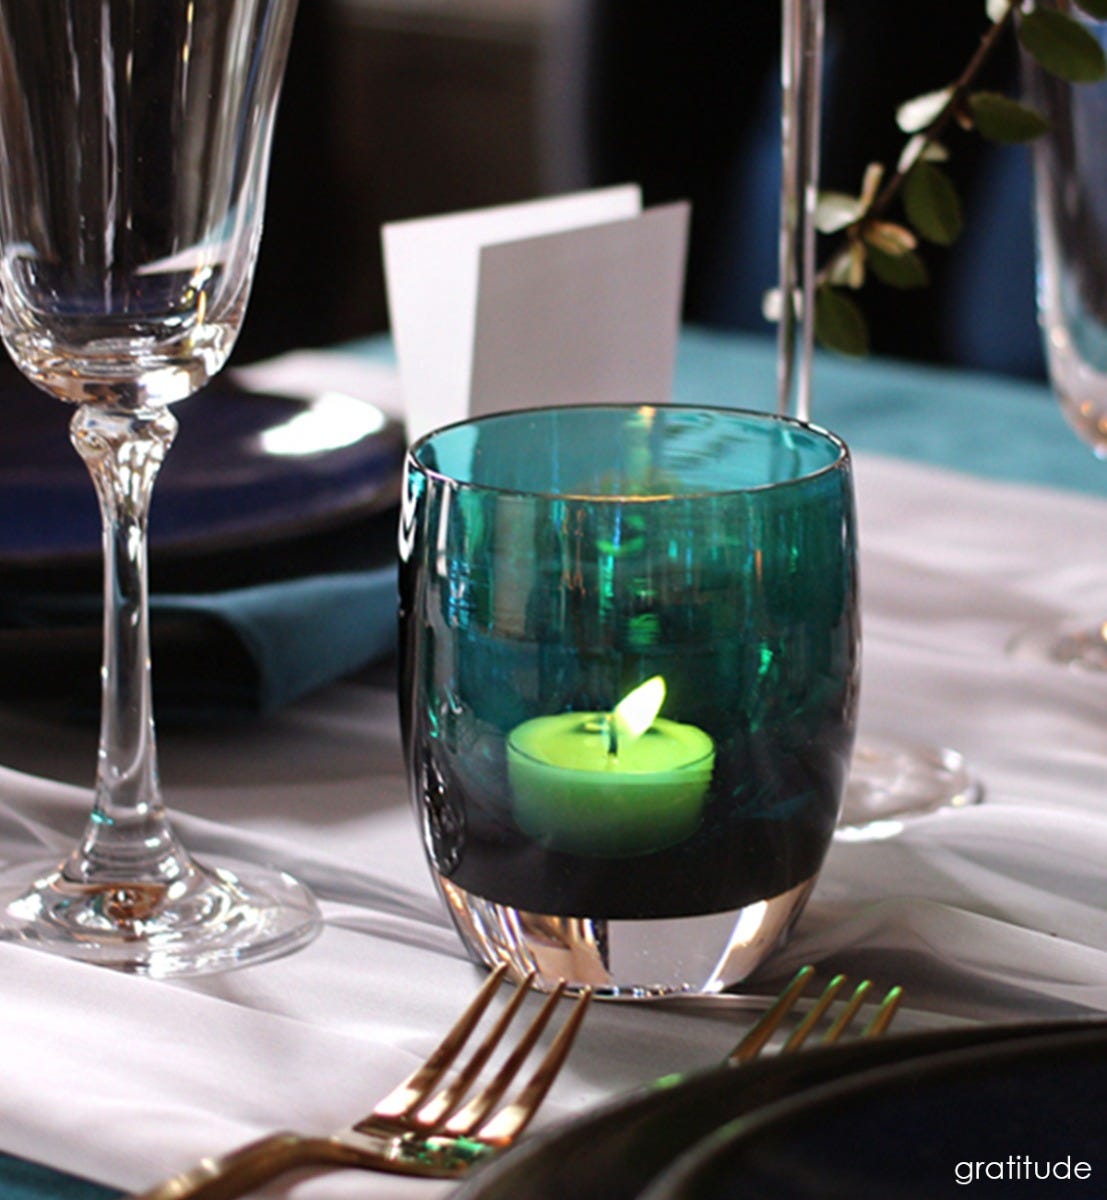 gratitude too, textured translucent teal green with silver luster, hand-blown glass votive candle holder presented with diningware.